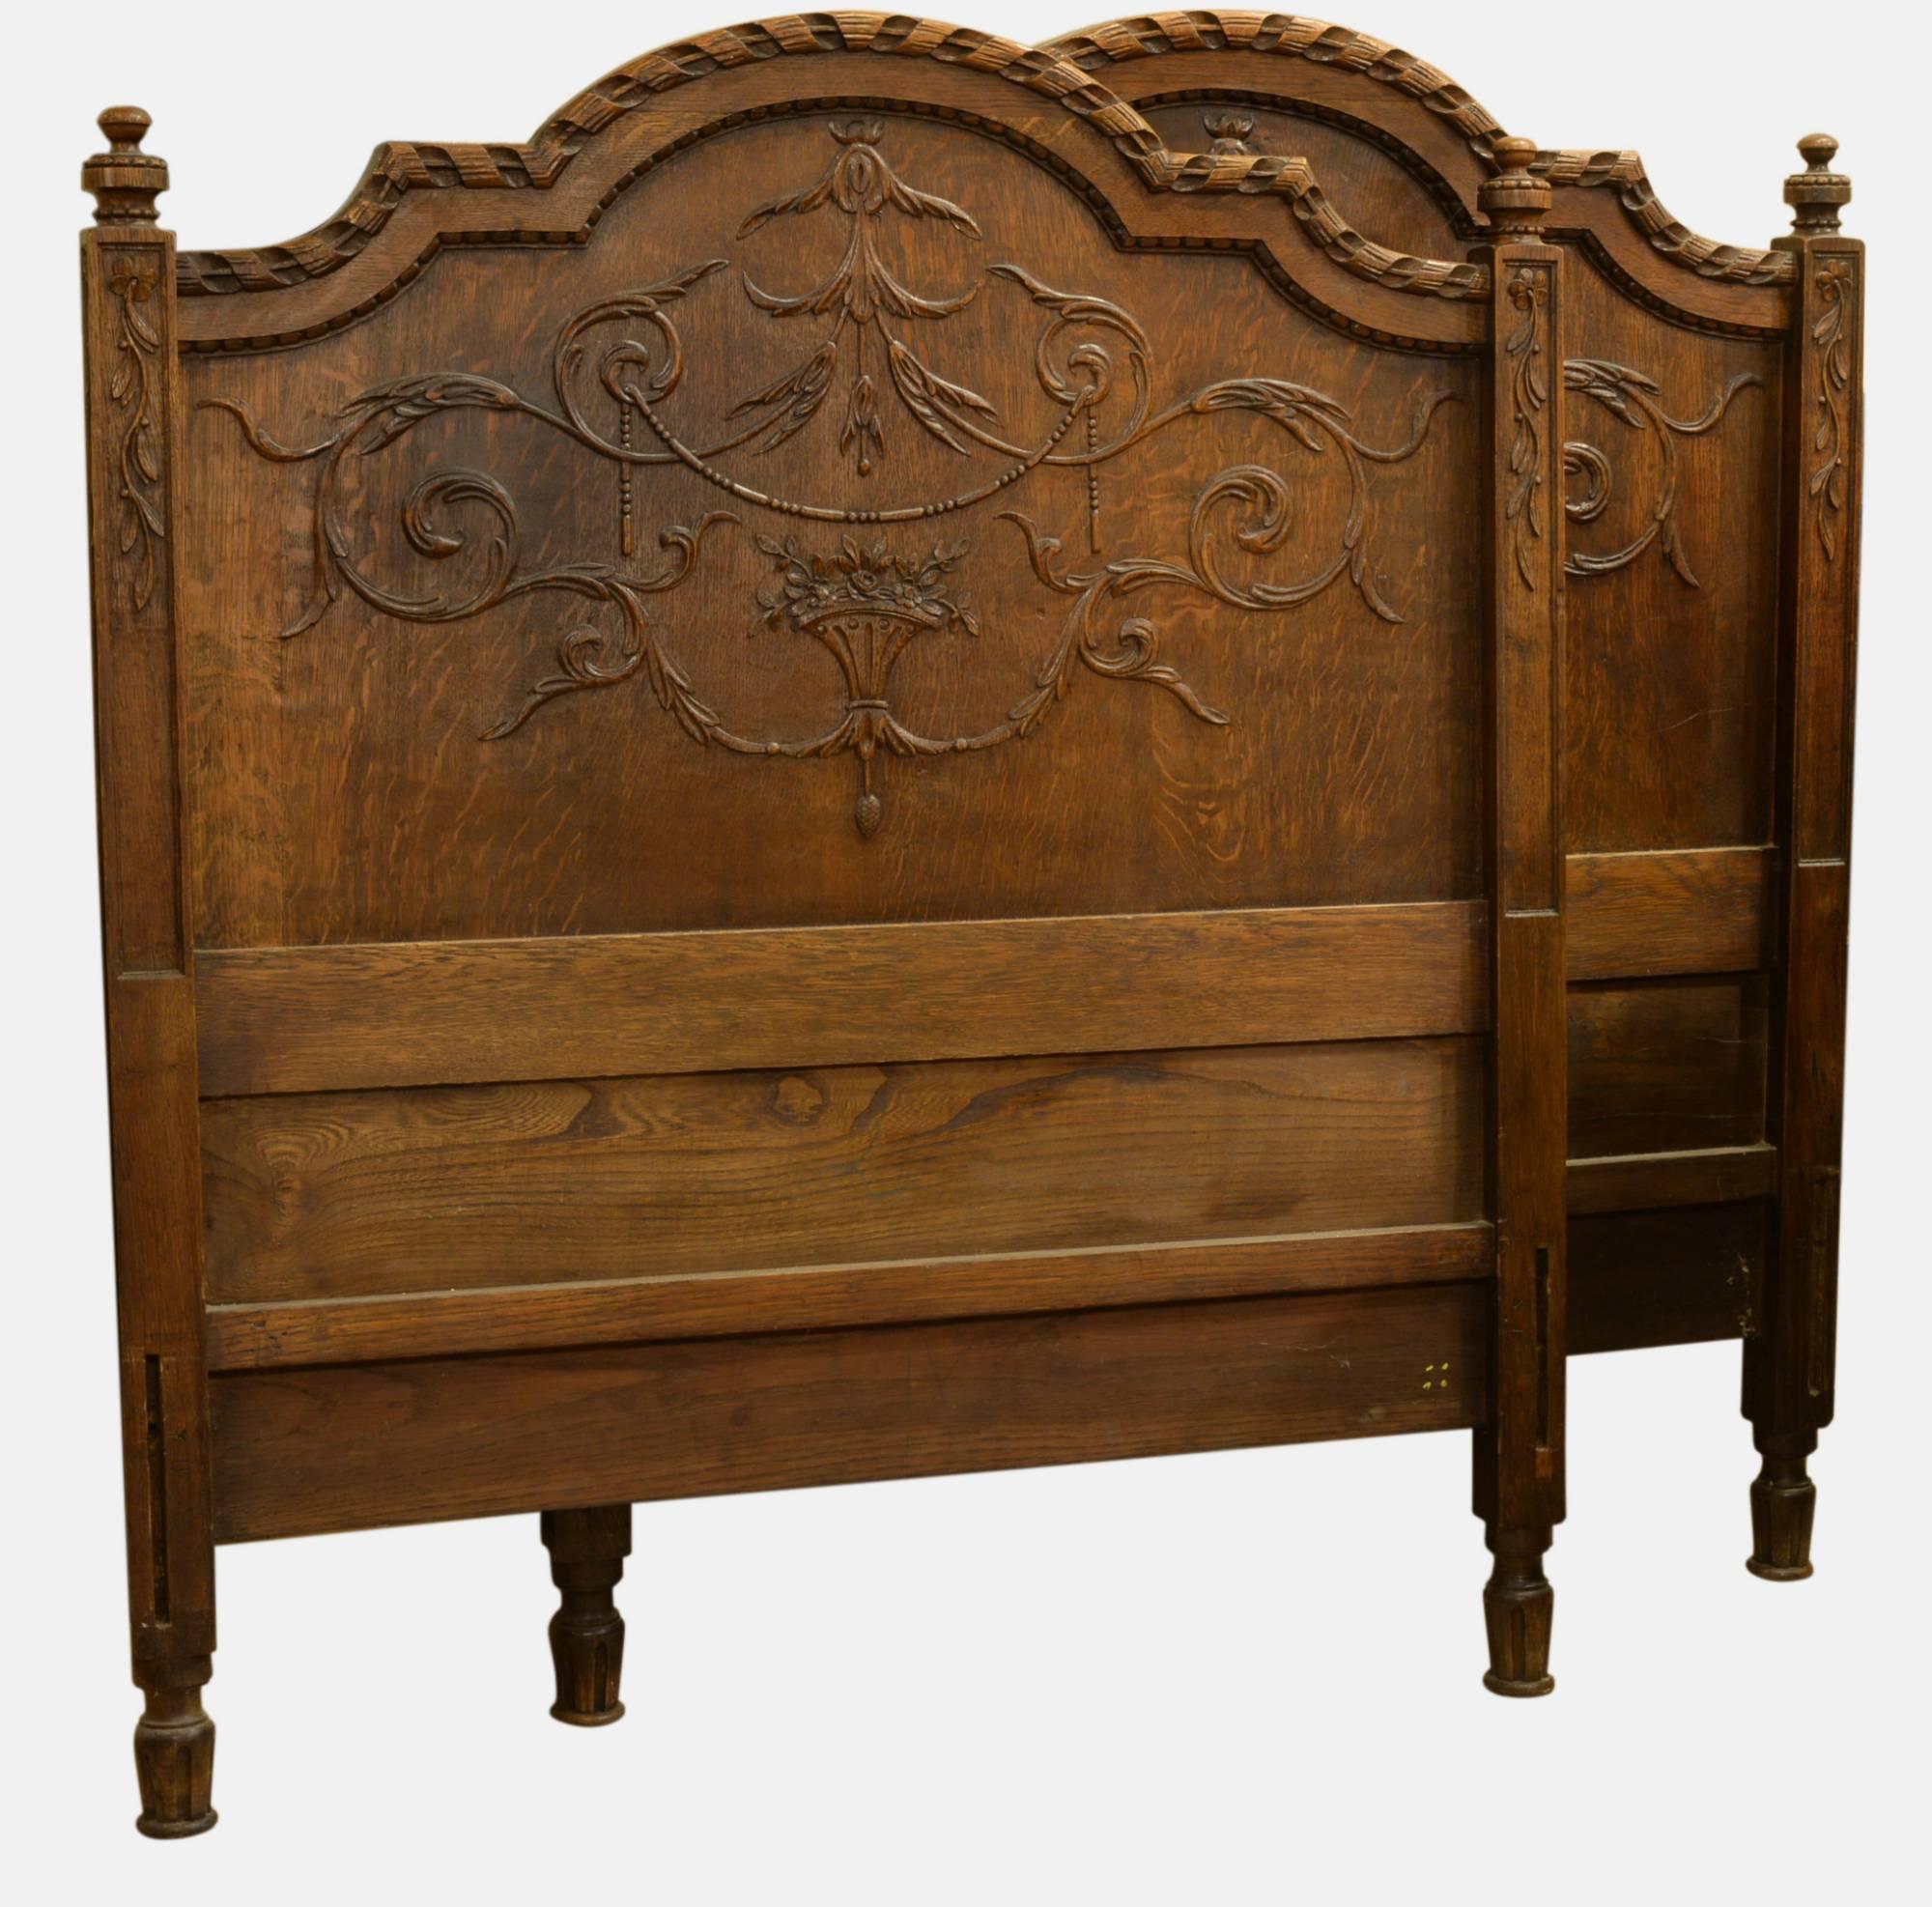 A pair of French carved oak single beds in Provencale style.